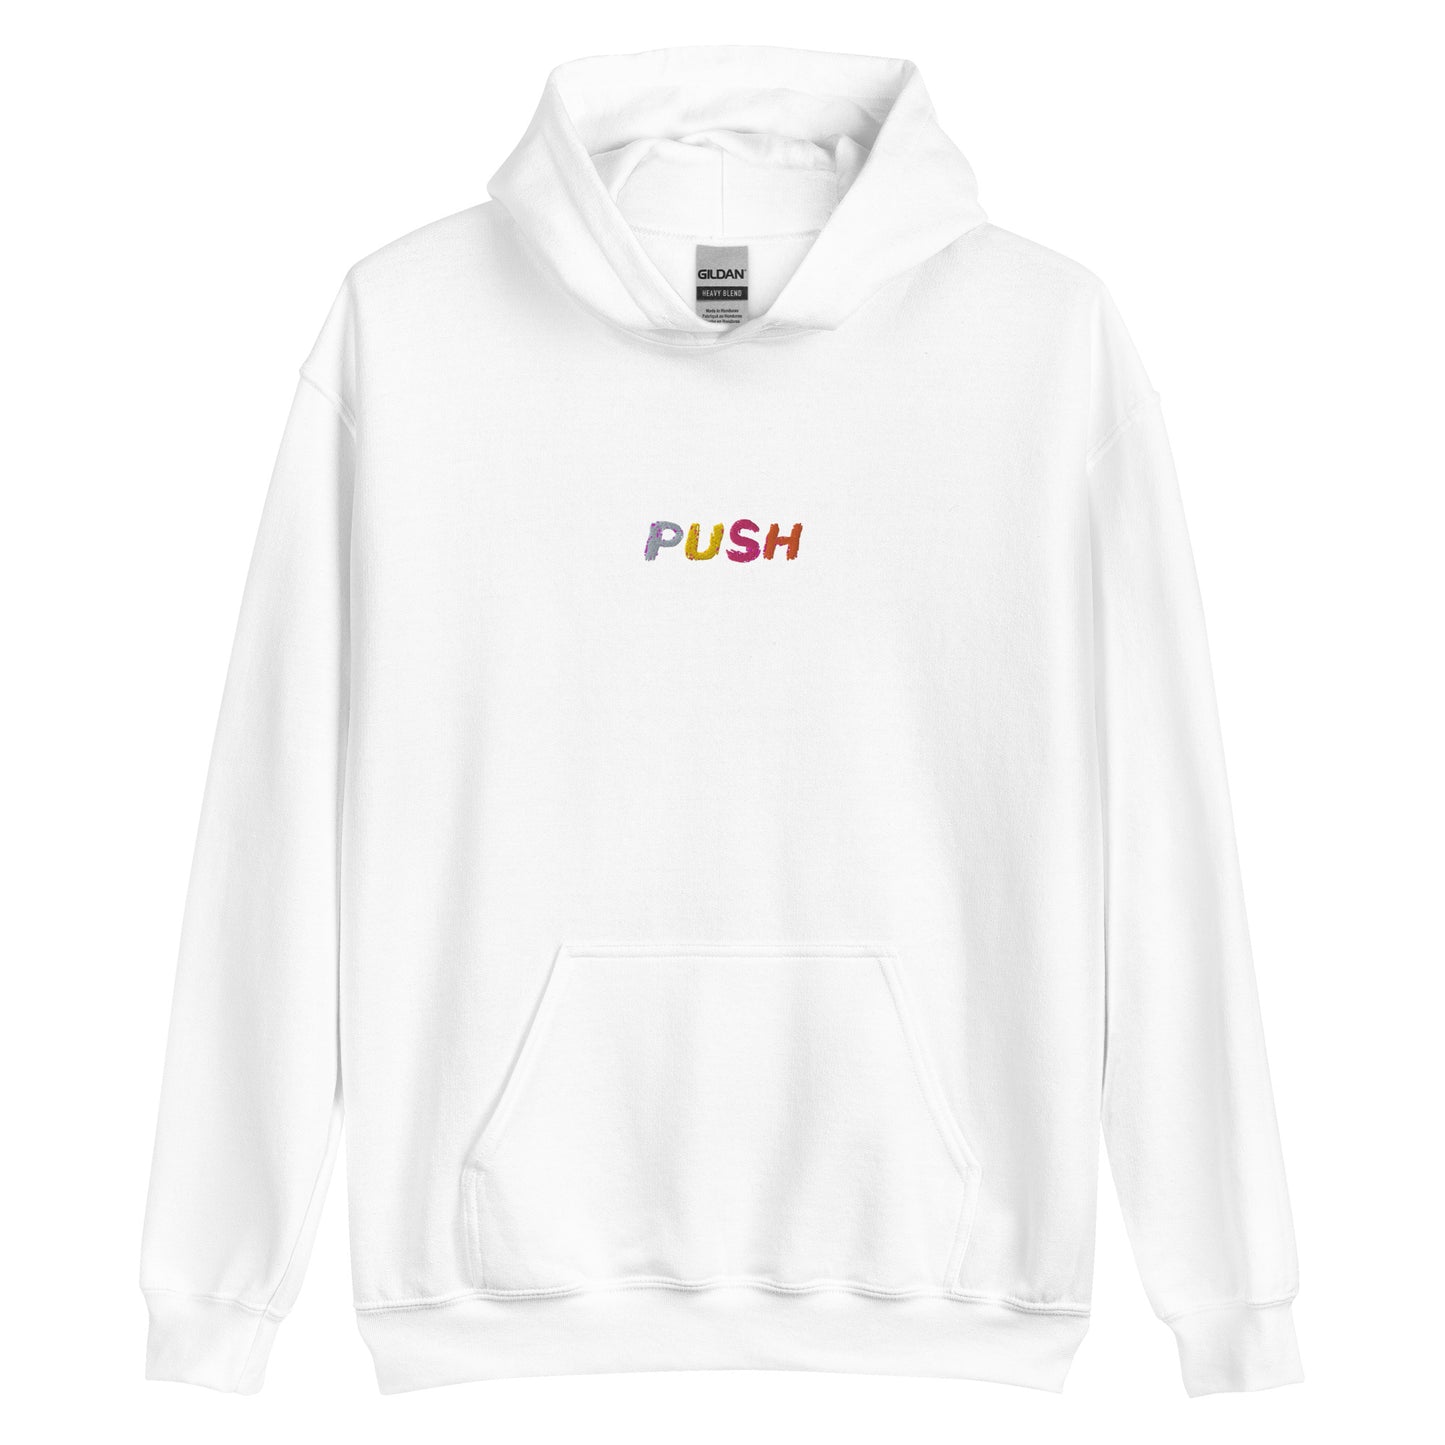 PUSH Embroidered Hoodie - white / S - Shirts & Tops